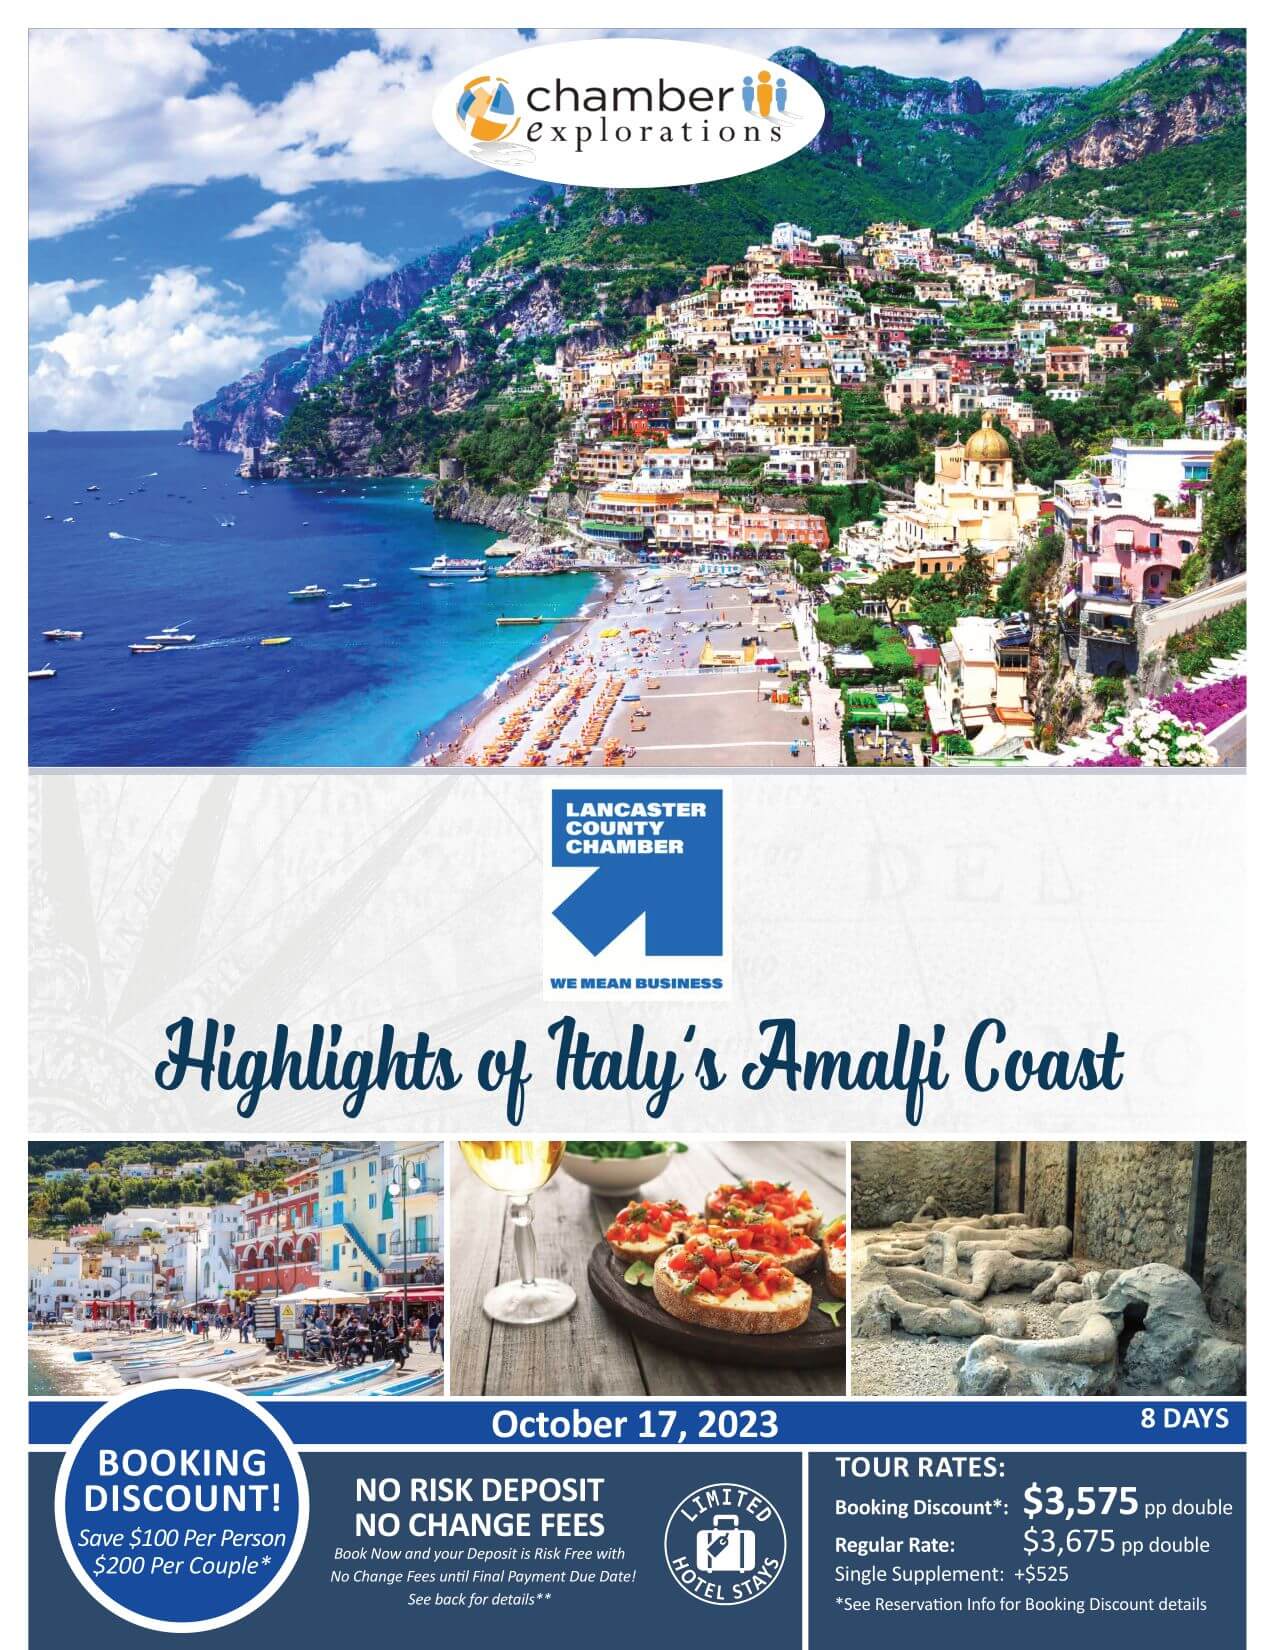 HIGHLIGHTS OF ITALYS AMALFI COAST - Lancaster County of Commerce - 17OCT23 - Exclusive Tour (1)